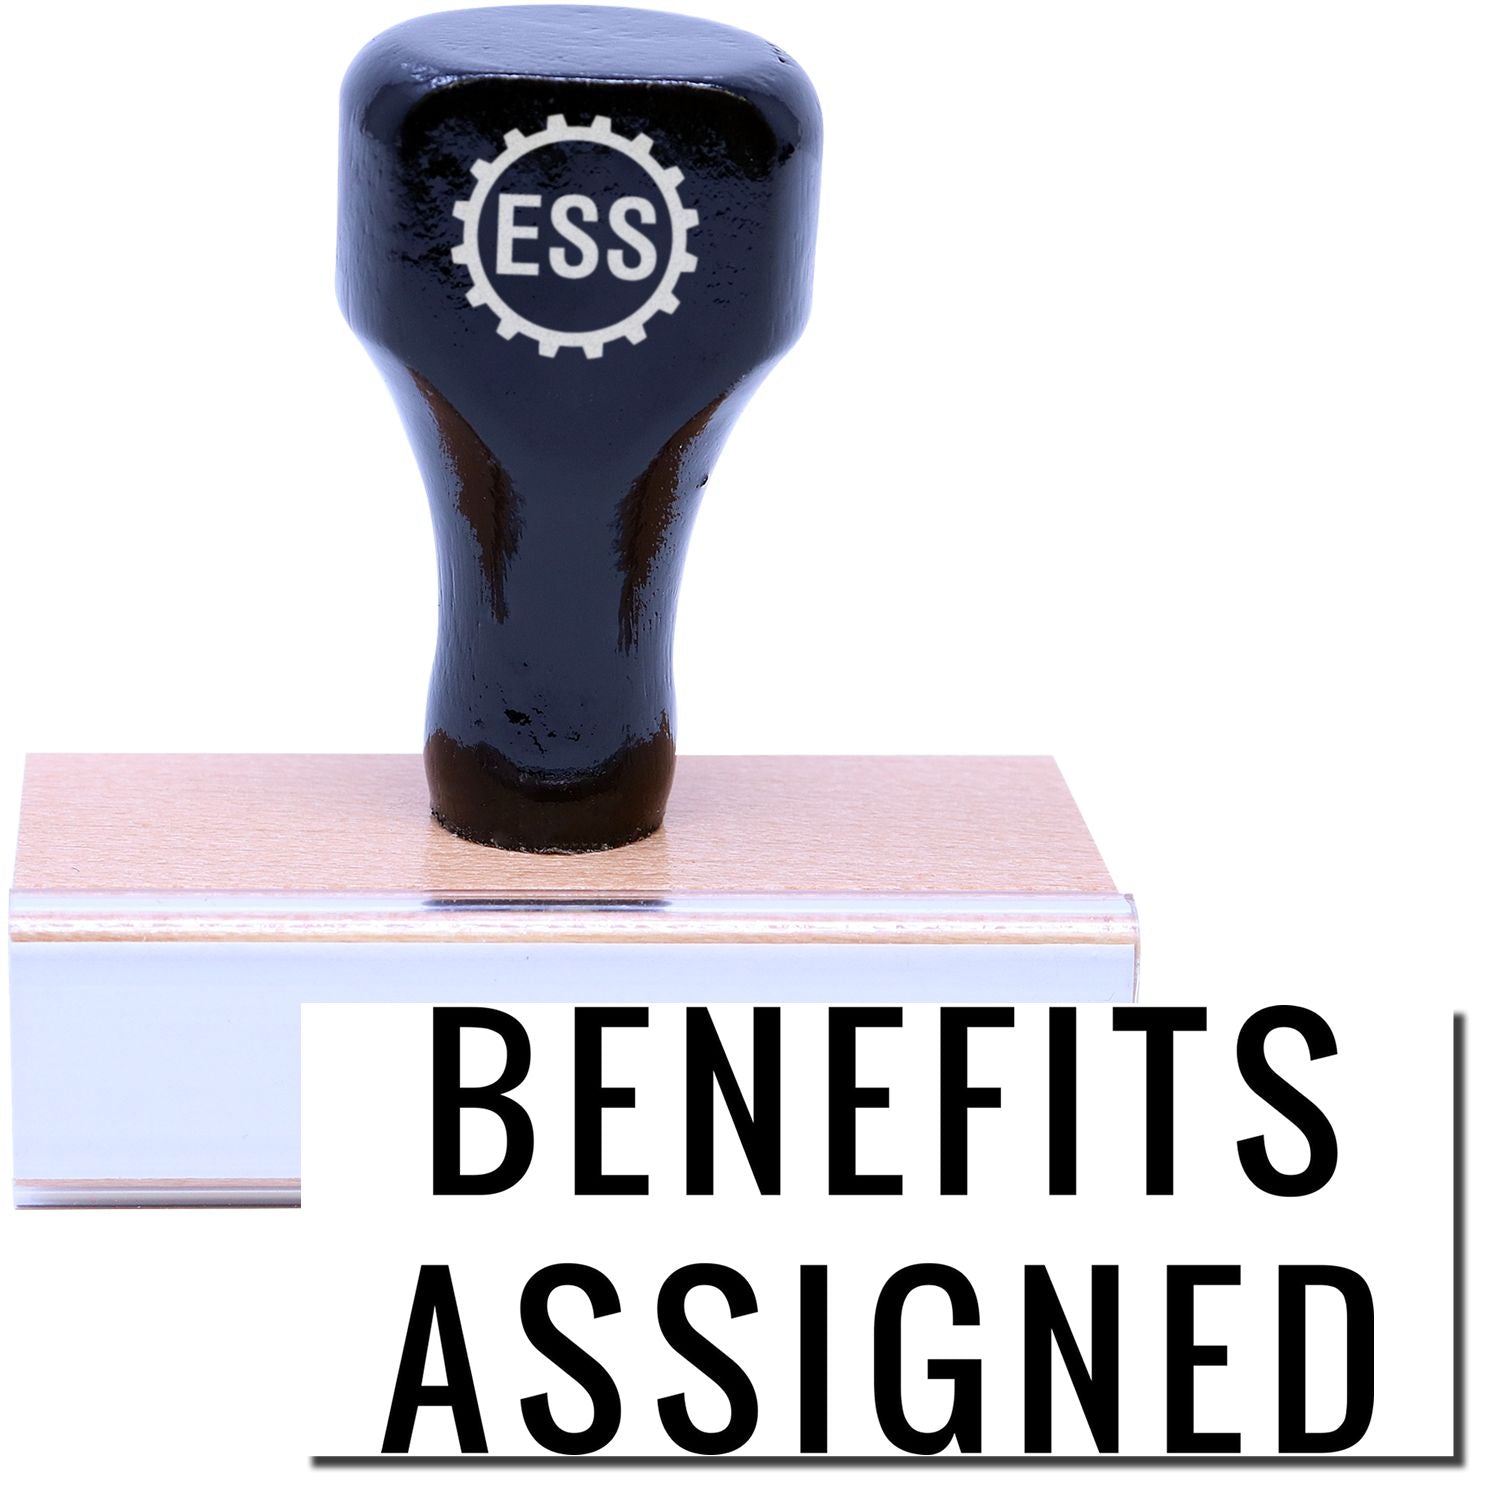 A stock office rubber stamp with a stamped image showing how the text "BENEFITS ASSIGNED" in a narrow font is displayed after stamping.